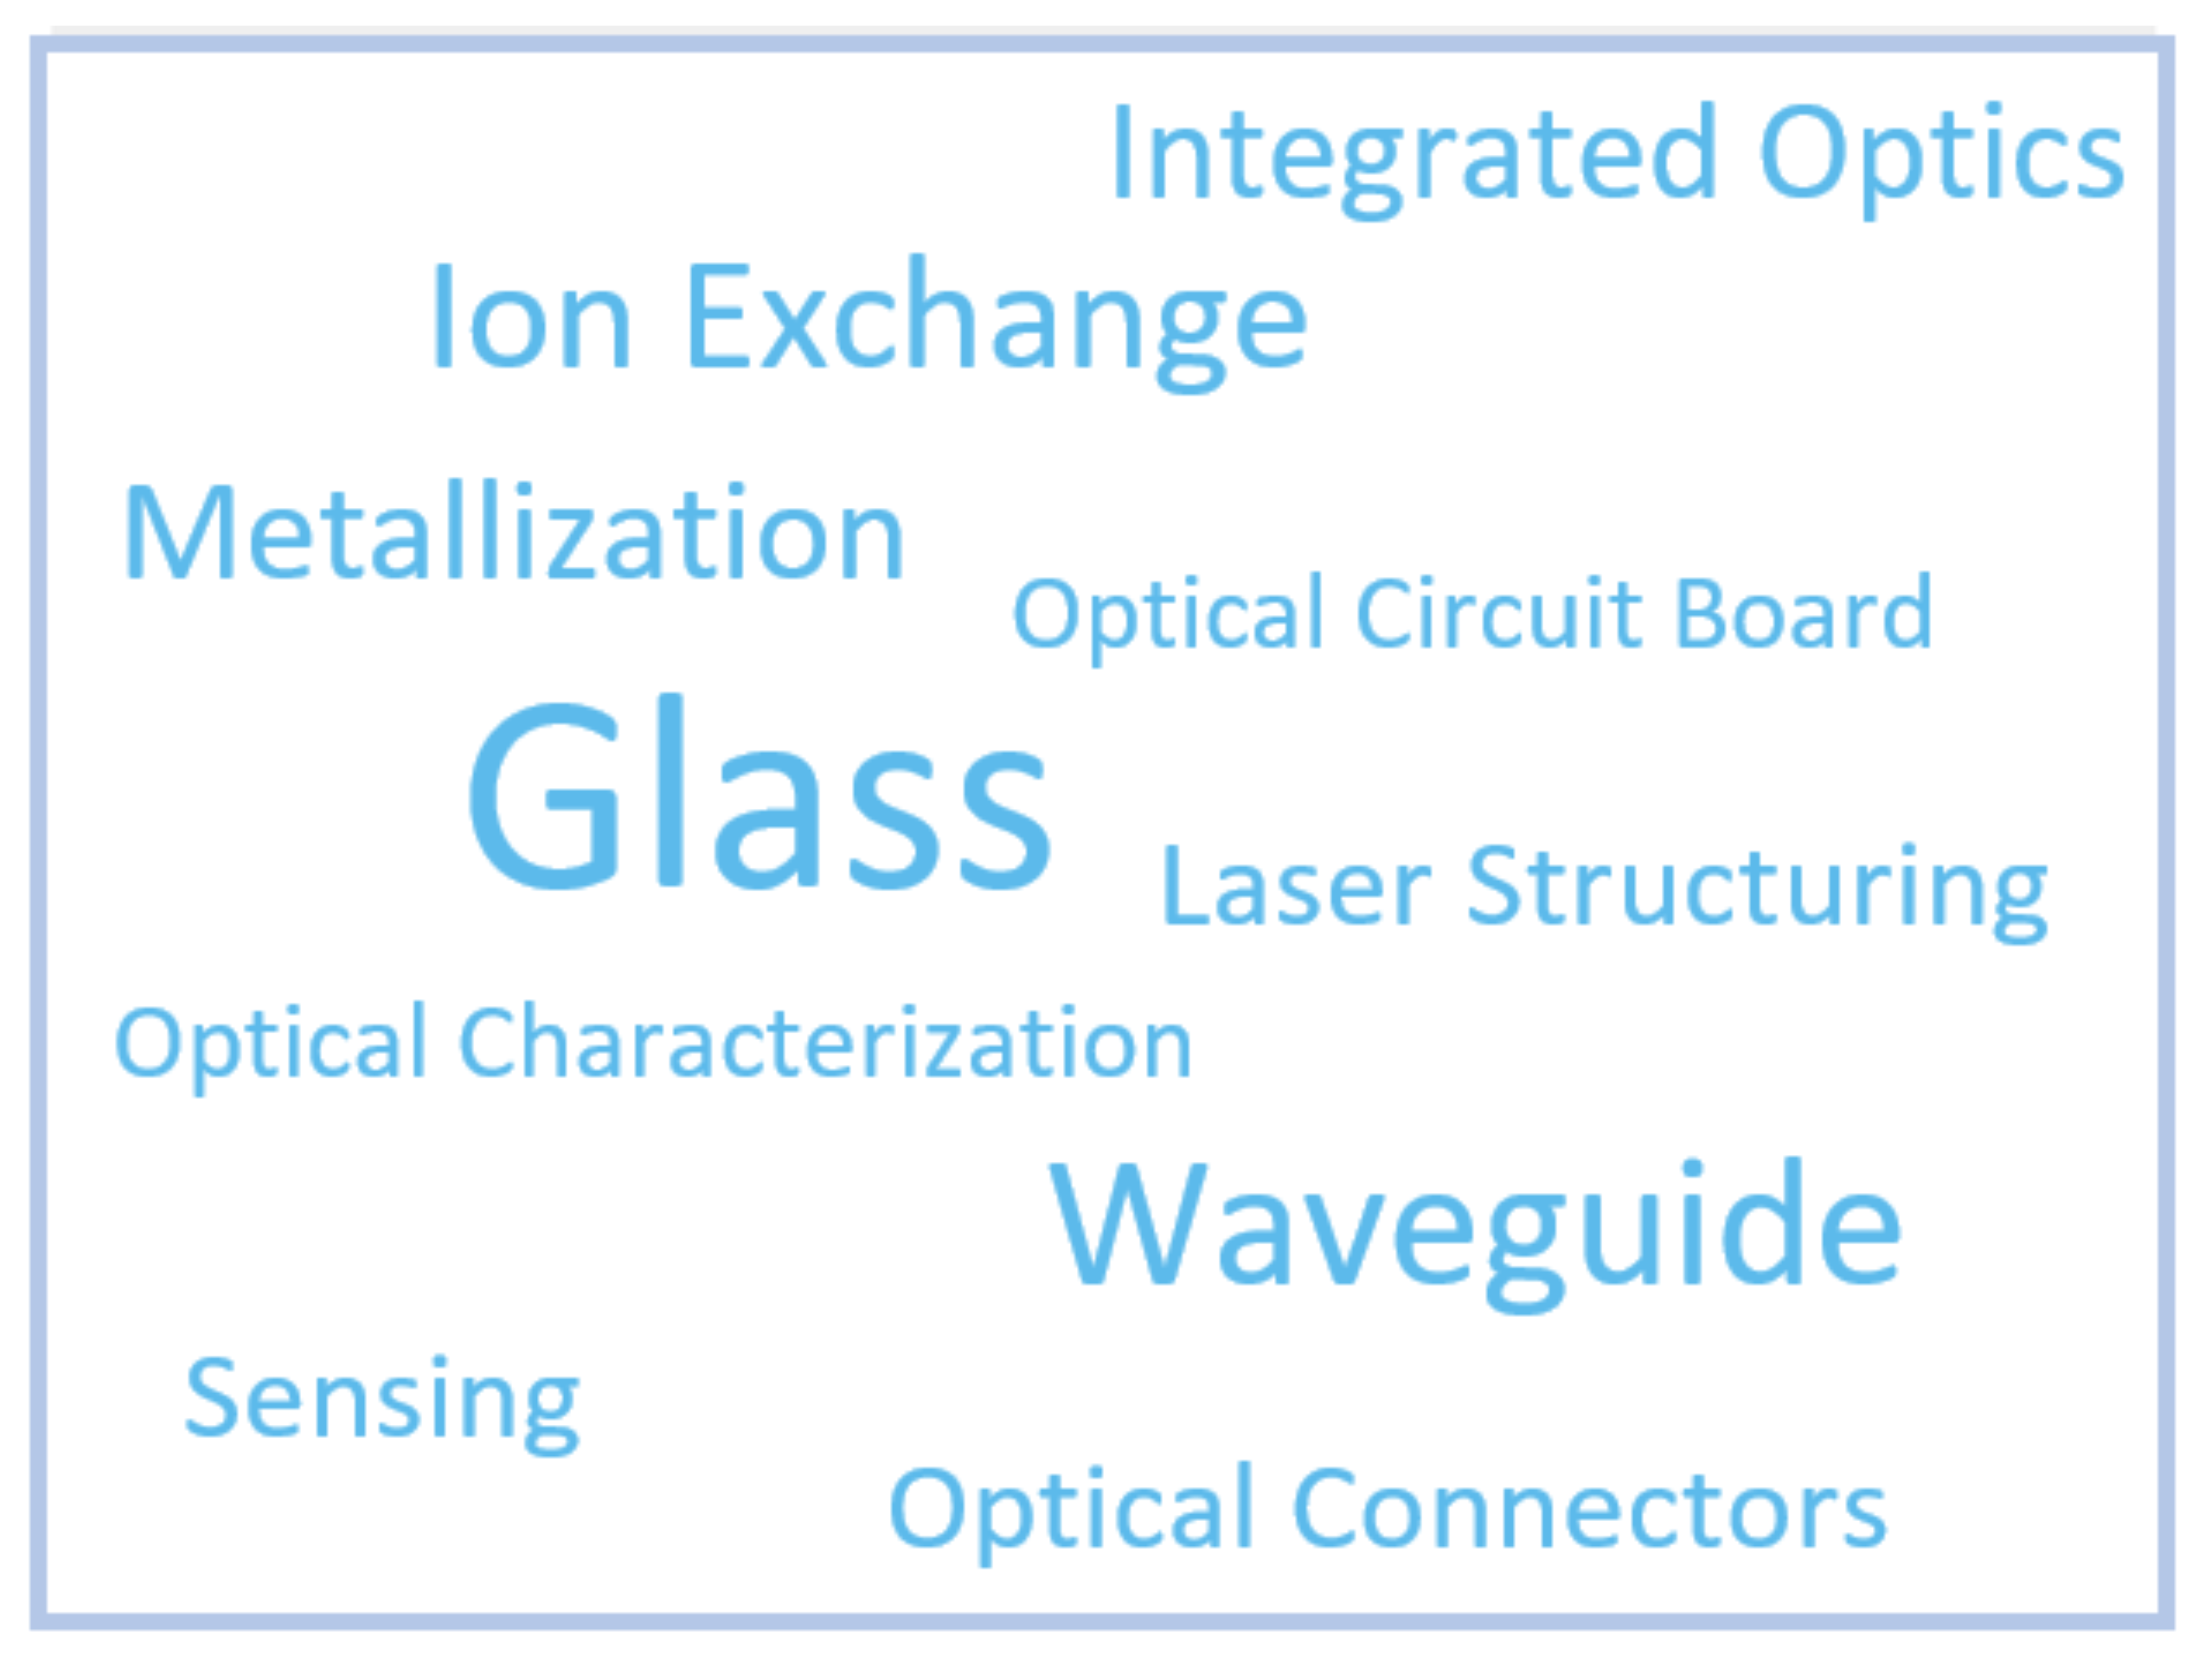 image - Working Groups - Optical Interconnection Technology